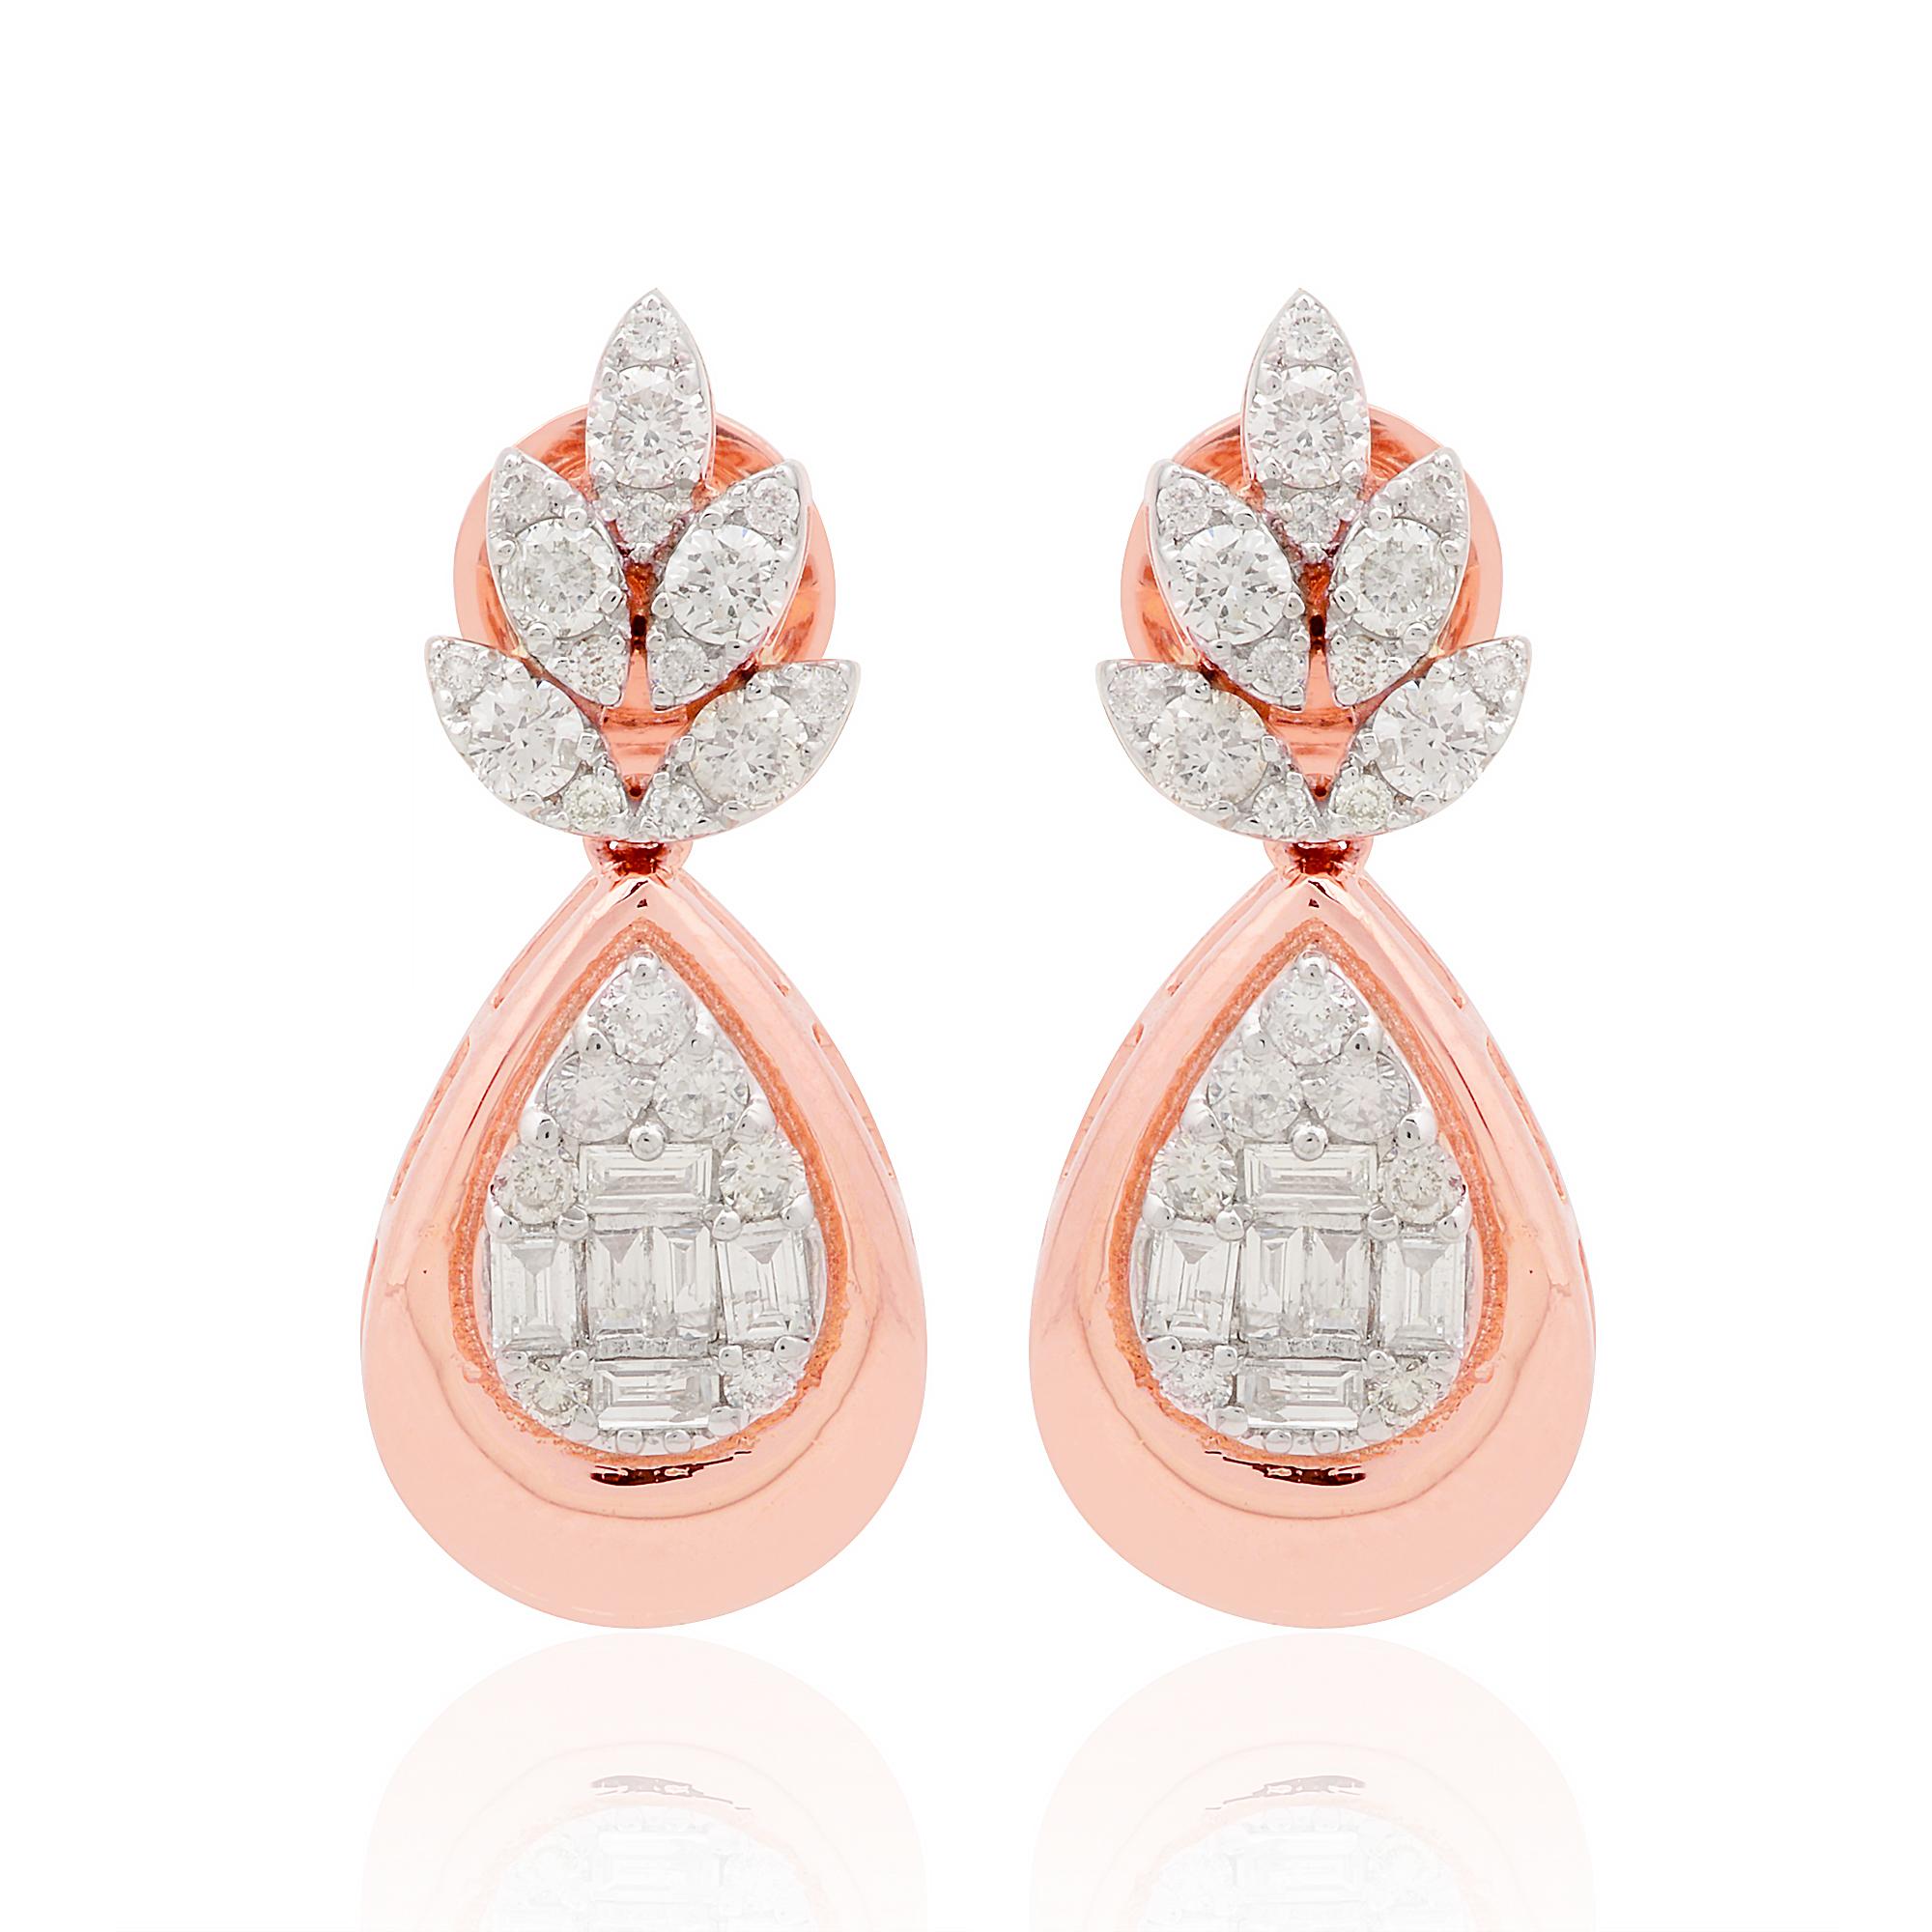 Item Code :- SEE-1756A
Gross Wt. :- 6.91 gm
18k Rose Gold Wt.  :- 6.69 gm
Diamond Wt. :- 1.10 Ct. ( AVERAGE DIAMOND CLARITY SI1-SI2 & COLOR H-I )
Earrings Size :- 26 mm approx.
✦ Sizing
.....................
We can adjust most items to fit your